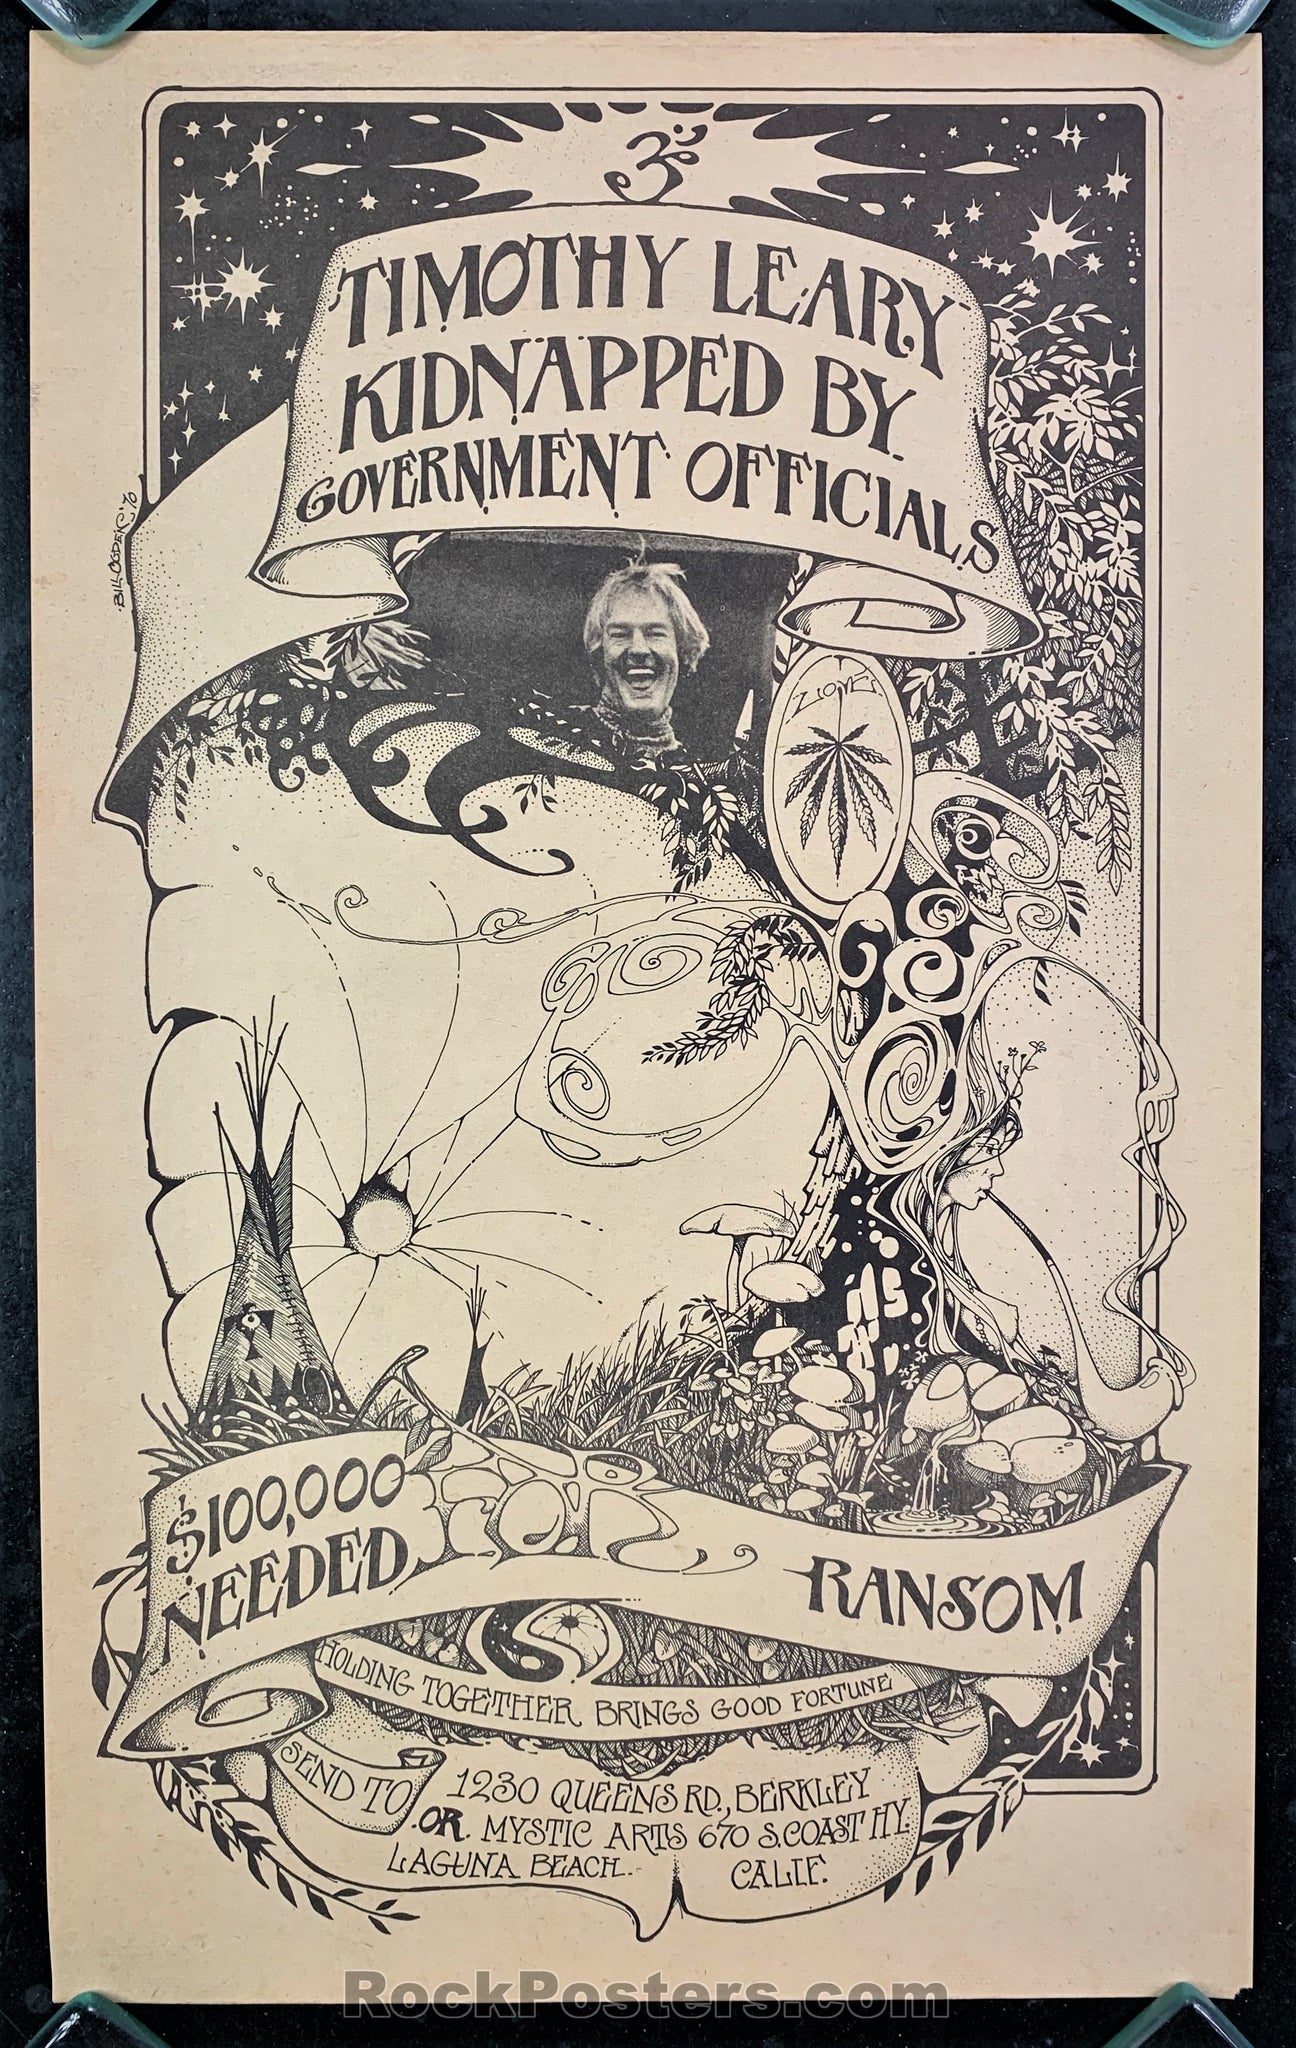 AUCTION - Timothy Leary - Kidnapped Brotherhood of Eternal Love - 1970 Bill Ogden Poster - Excellent